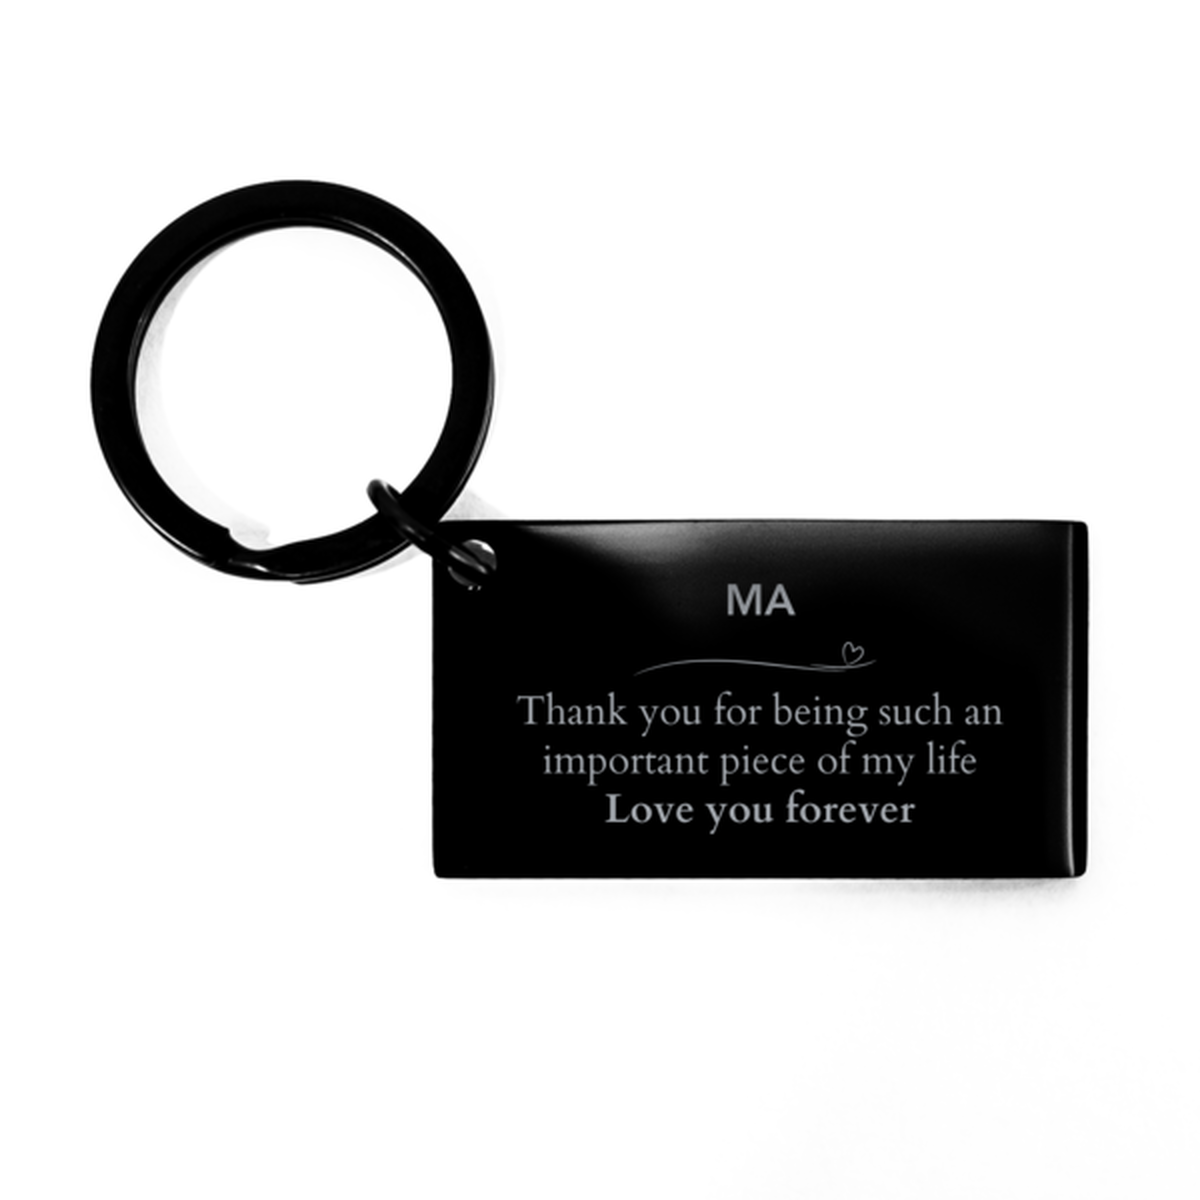 Appropriate Ma Keychain Epic Birthday Gifts for Ma Thank you for being such an important piece of my life Ma Christmas Mothers Fathers Day